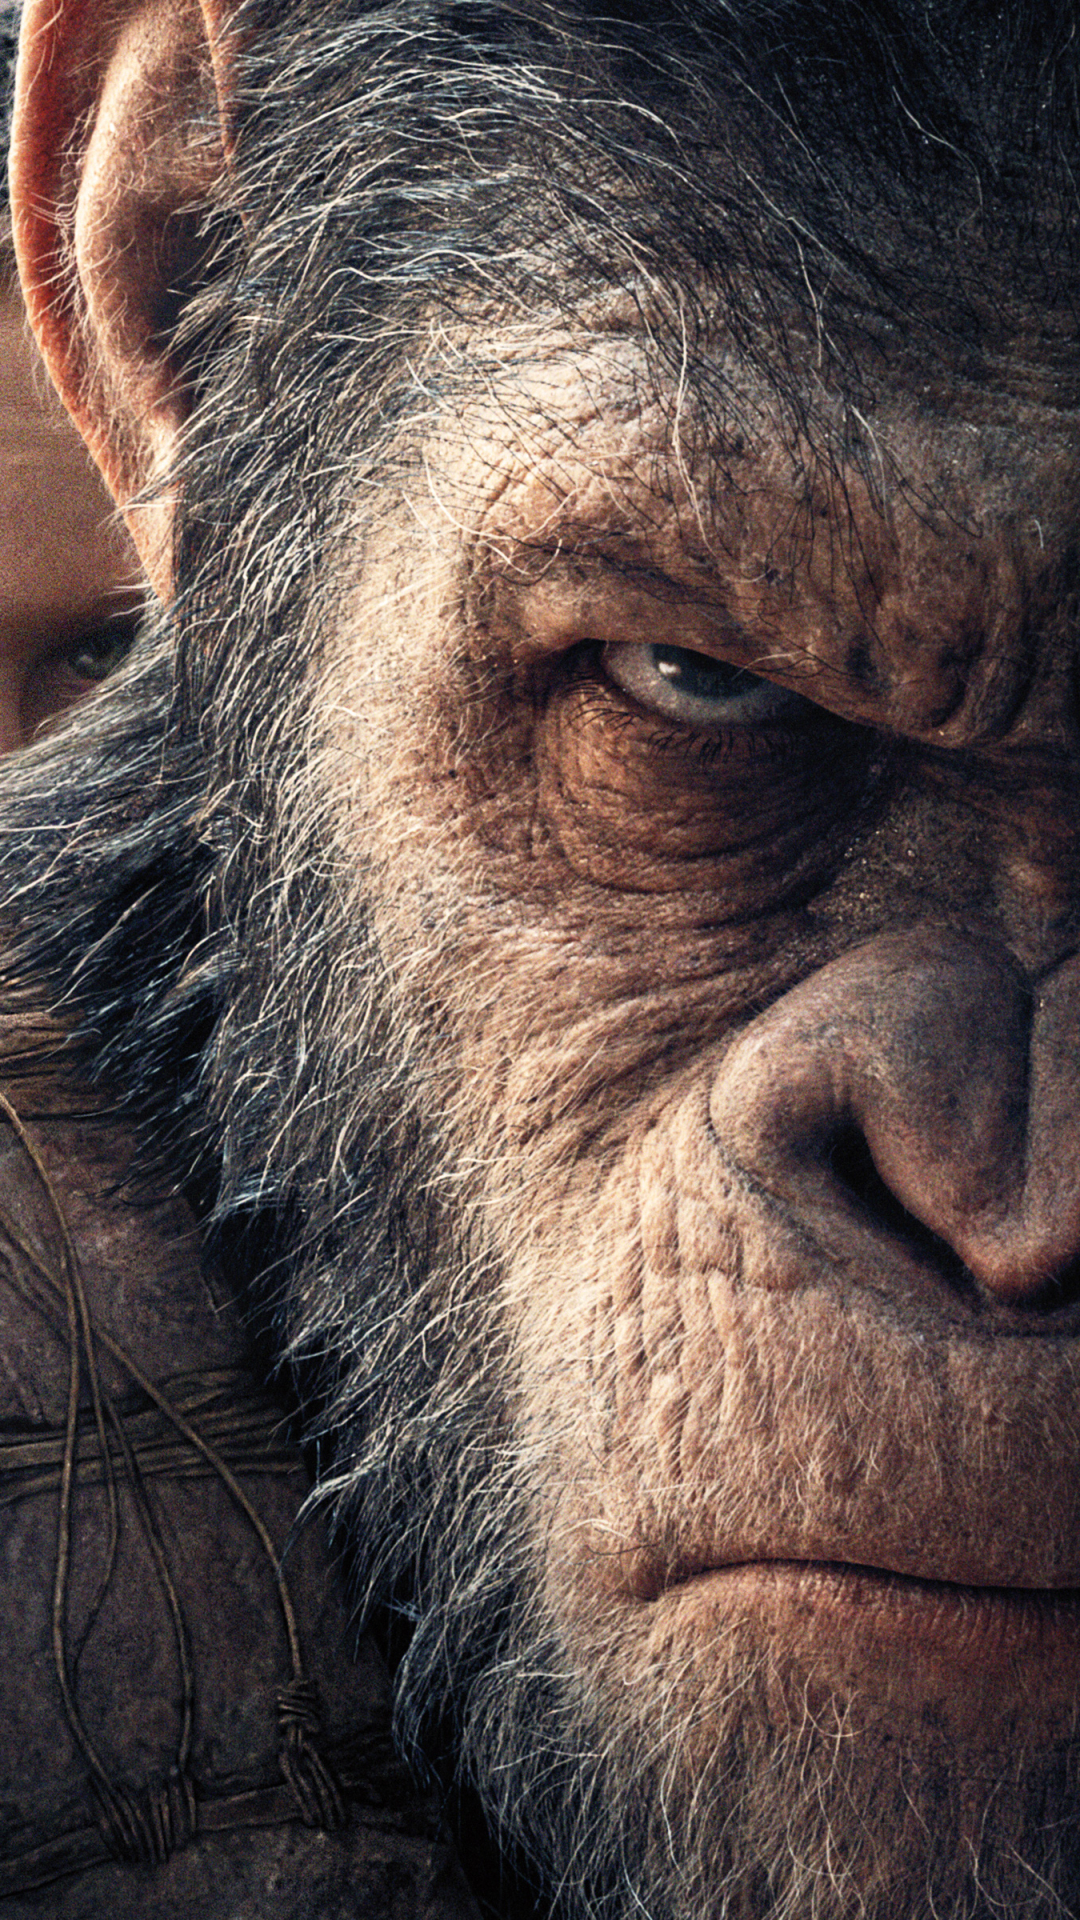 dawn of the planet of the apes wallpaper,skin,wrinkle,common chimpanzee,snout,primate